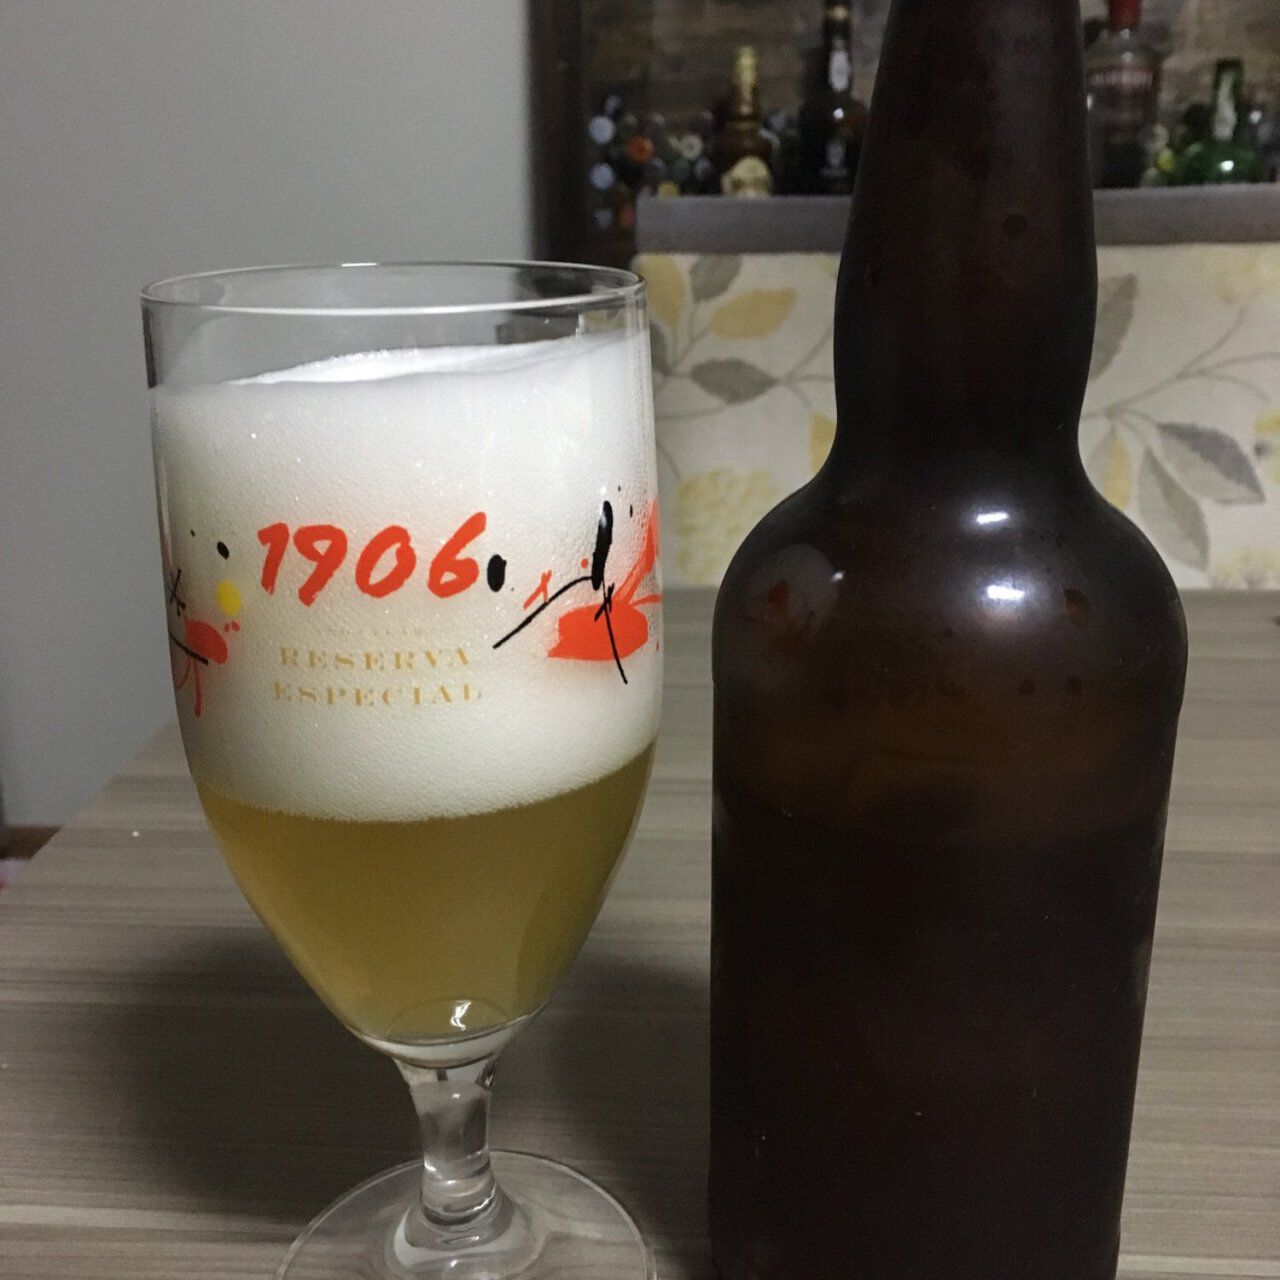 Learning Series' #12: (Another) Trappist Single